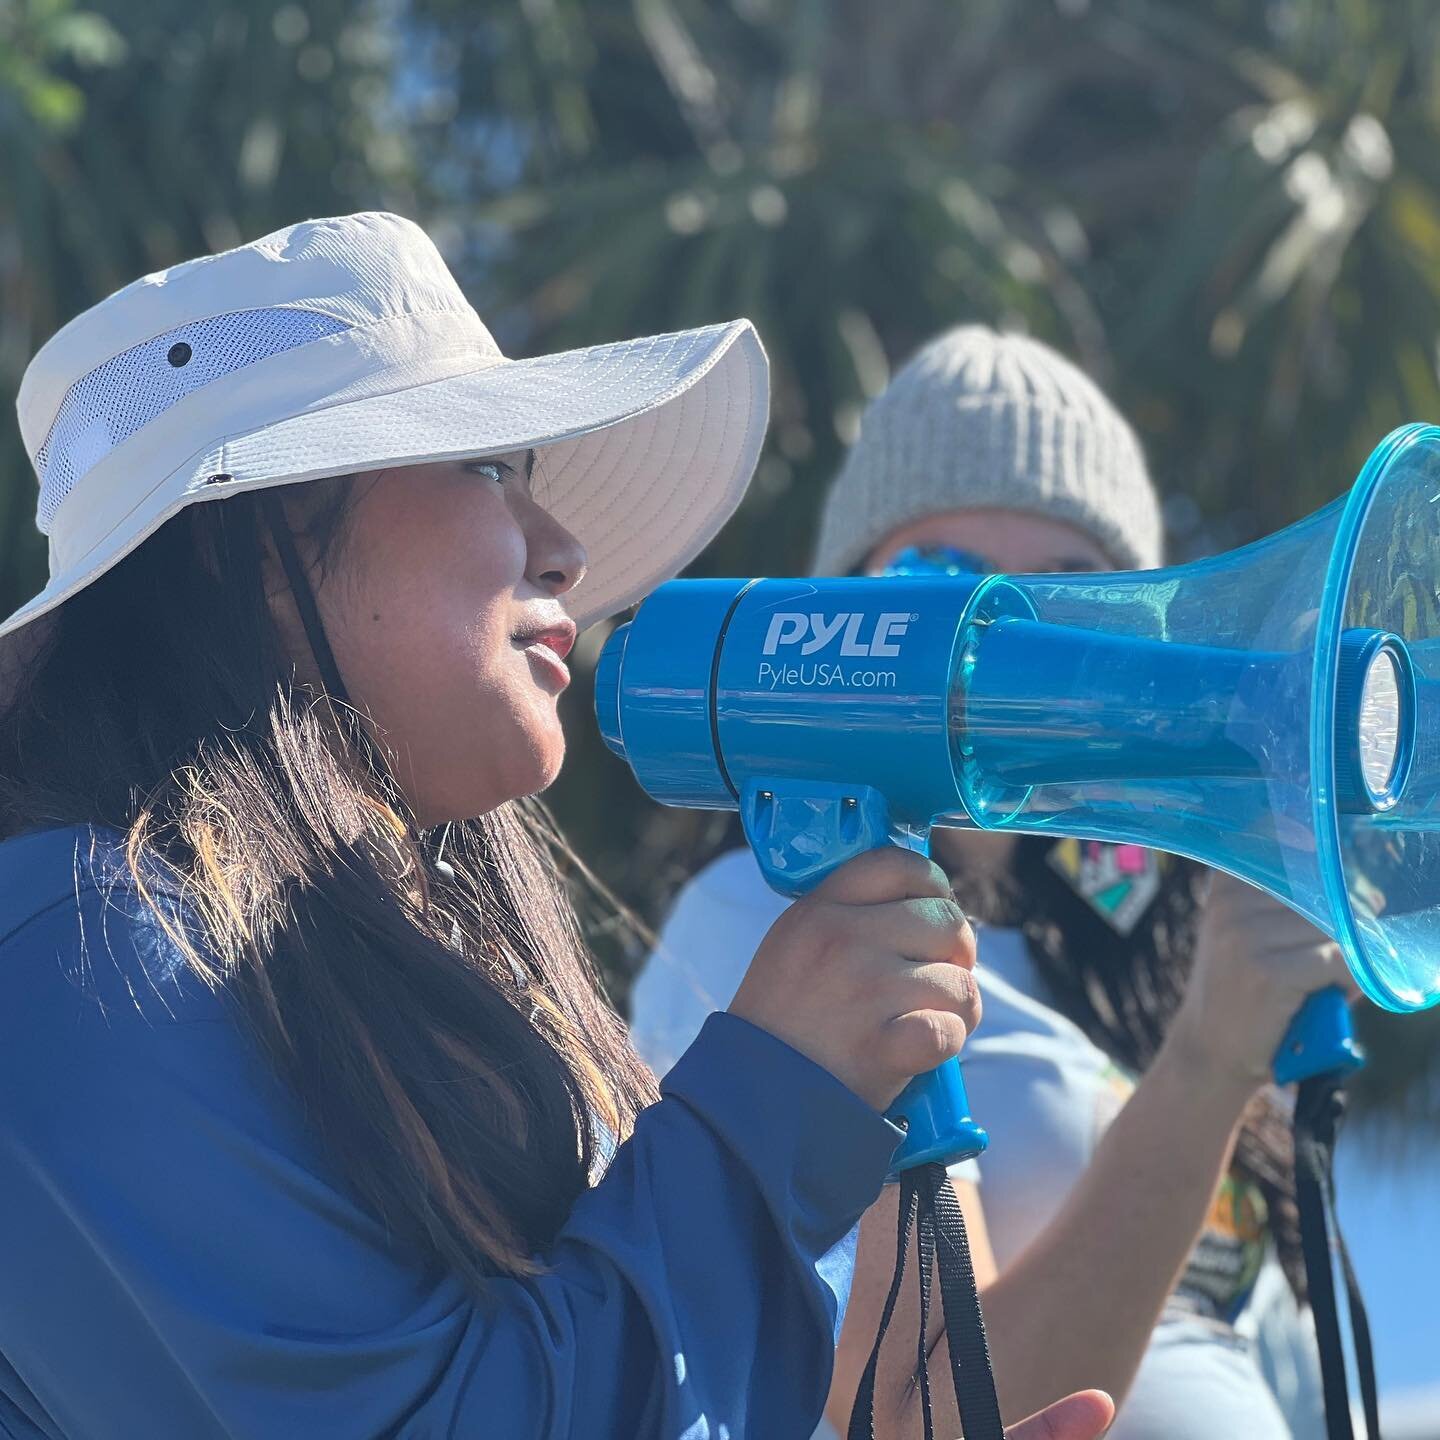 Students and young people from Immokalee to Mississippi fighting for a #FairFoodFuture! ☀️

Last week, we joined the @immokalee.workers as part of a five-day march of nearly fifty miles! We began the march in a town called Pahokee, FL the site of a r